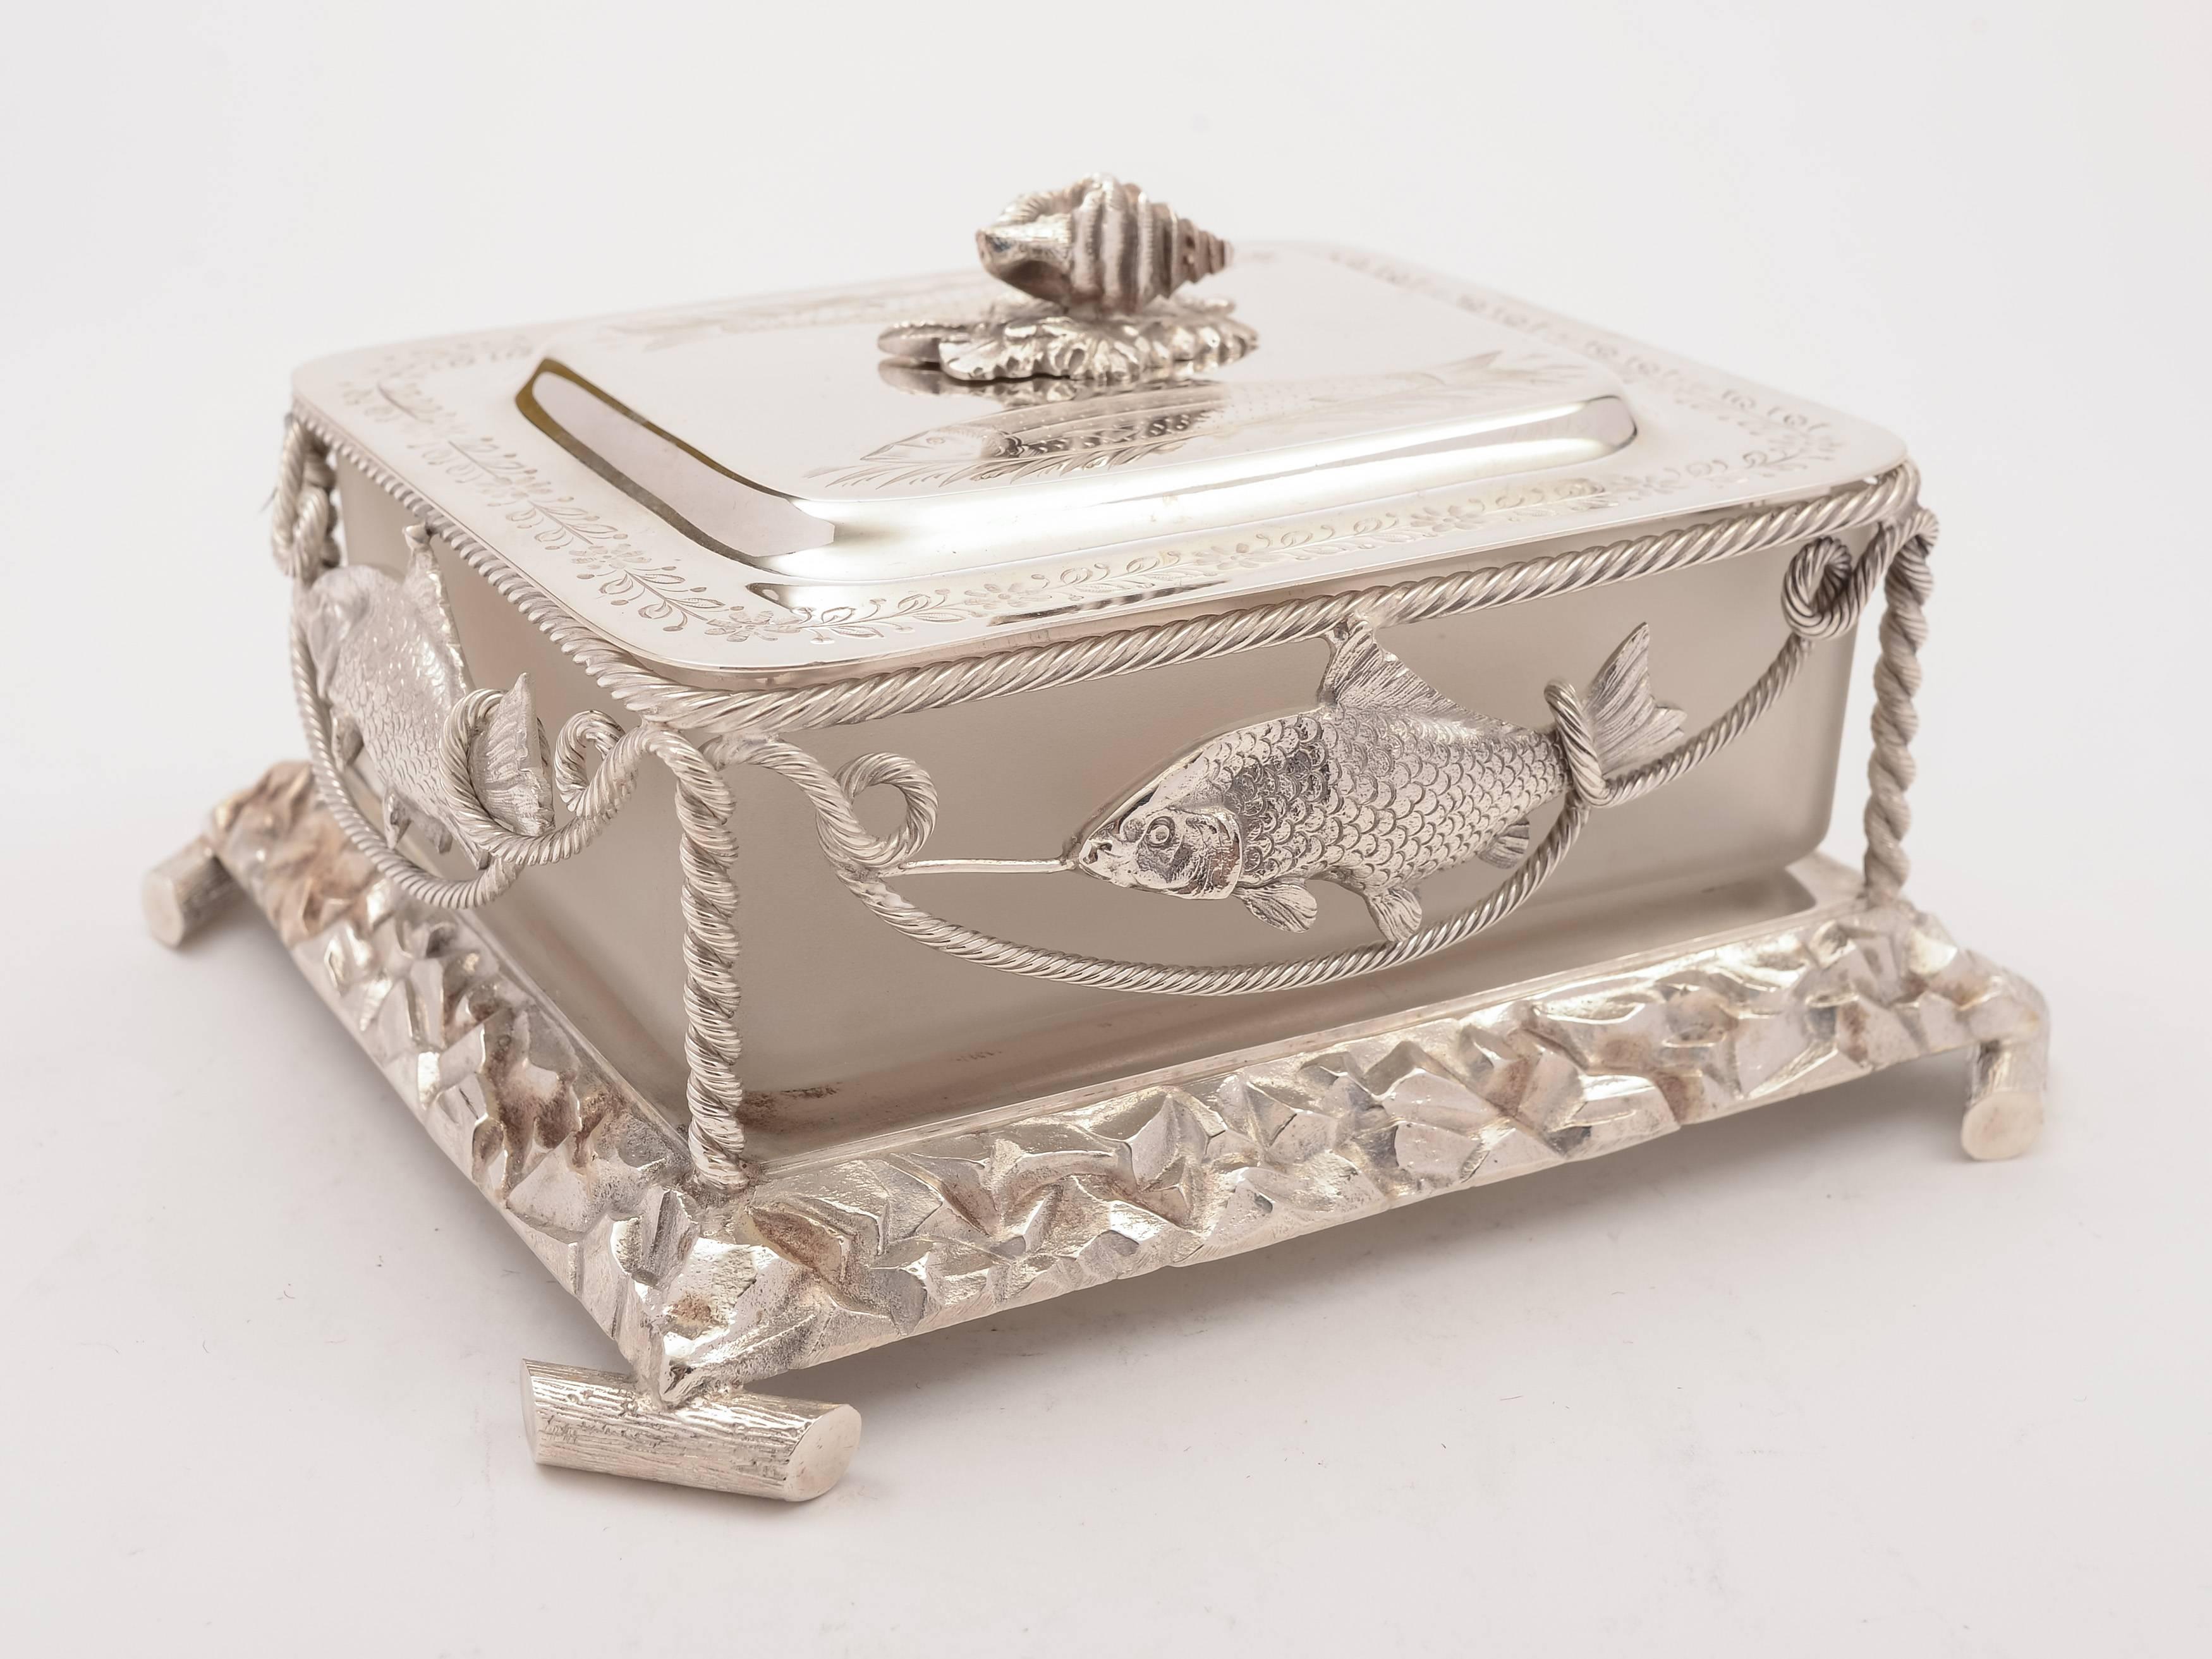 A beautiful and unusual English Victorian novelty silver plated butter dish with shell and fish decoration embossed to the outside, engraved decoration to lid and shell finial. Has frosted glass liner, circa 1880.

 

Measurements:
Height 3